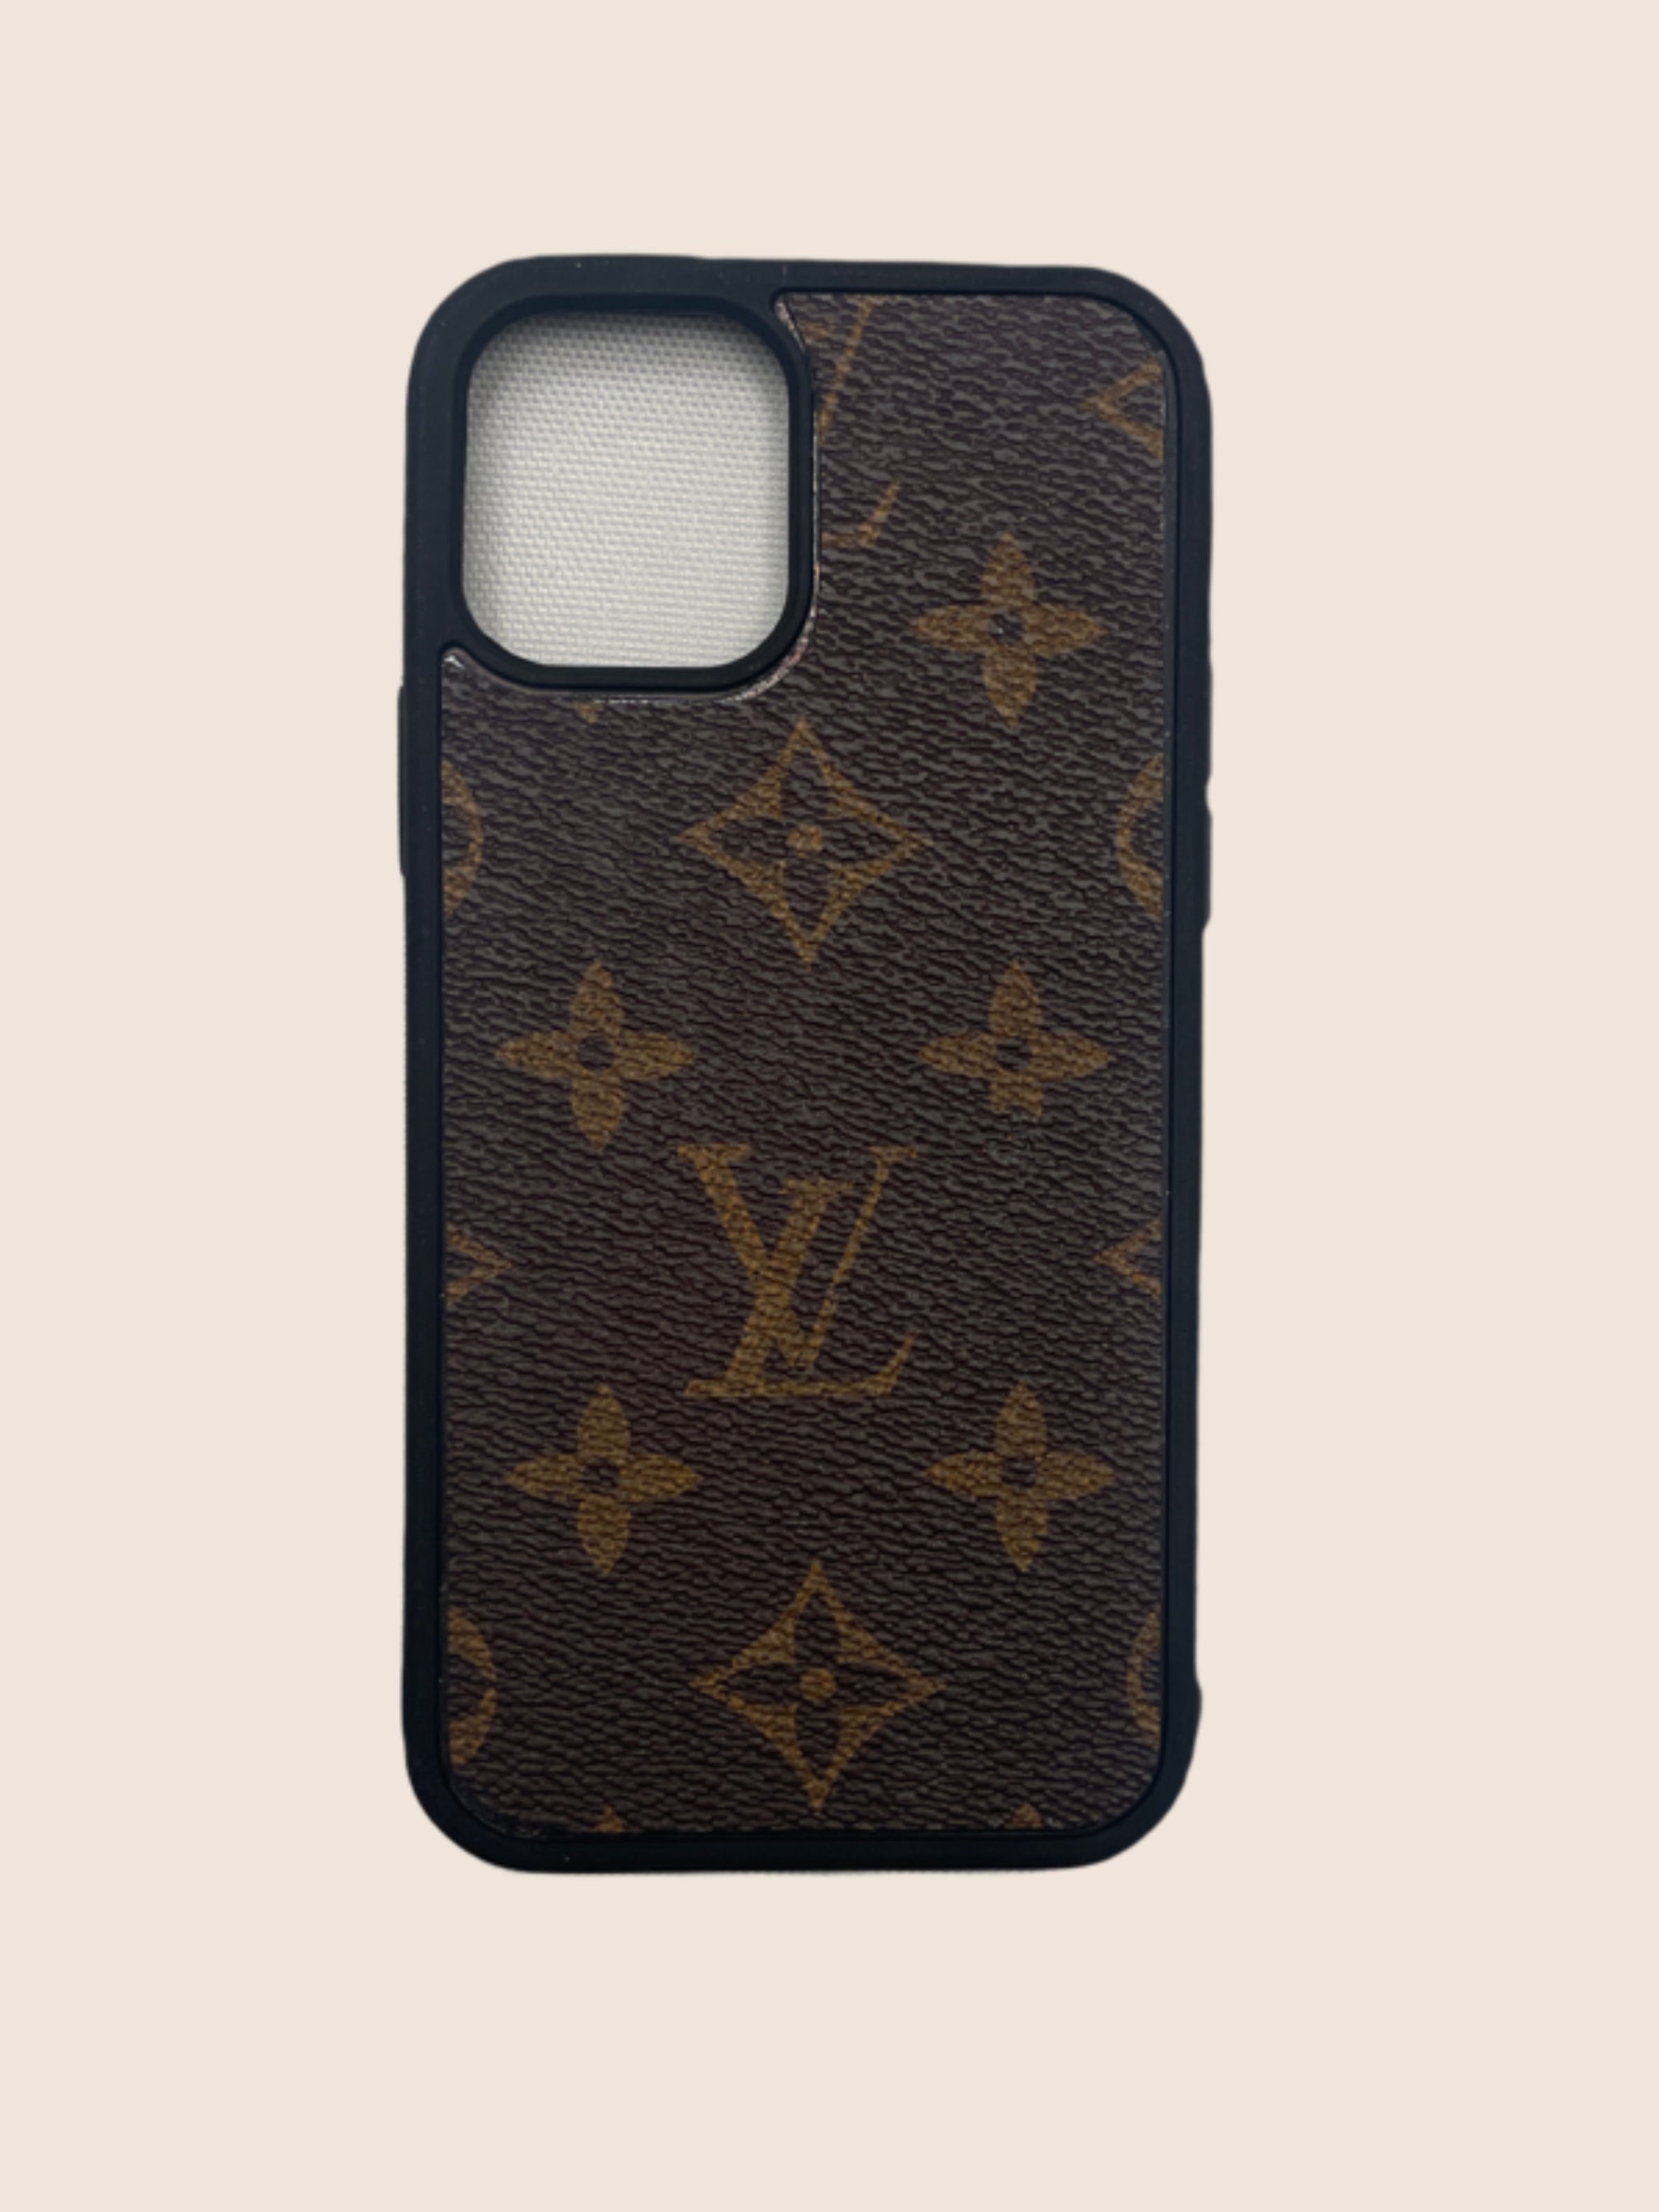 Marian Riveras Leather Chanel Phone Case Costs P50000